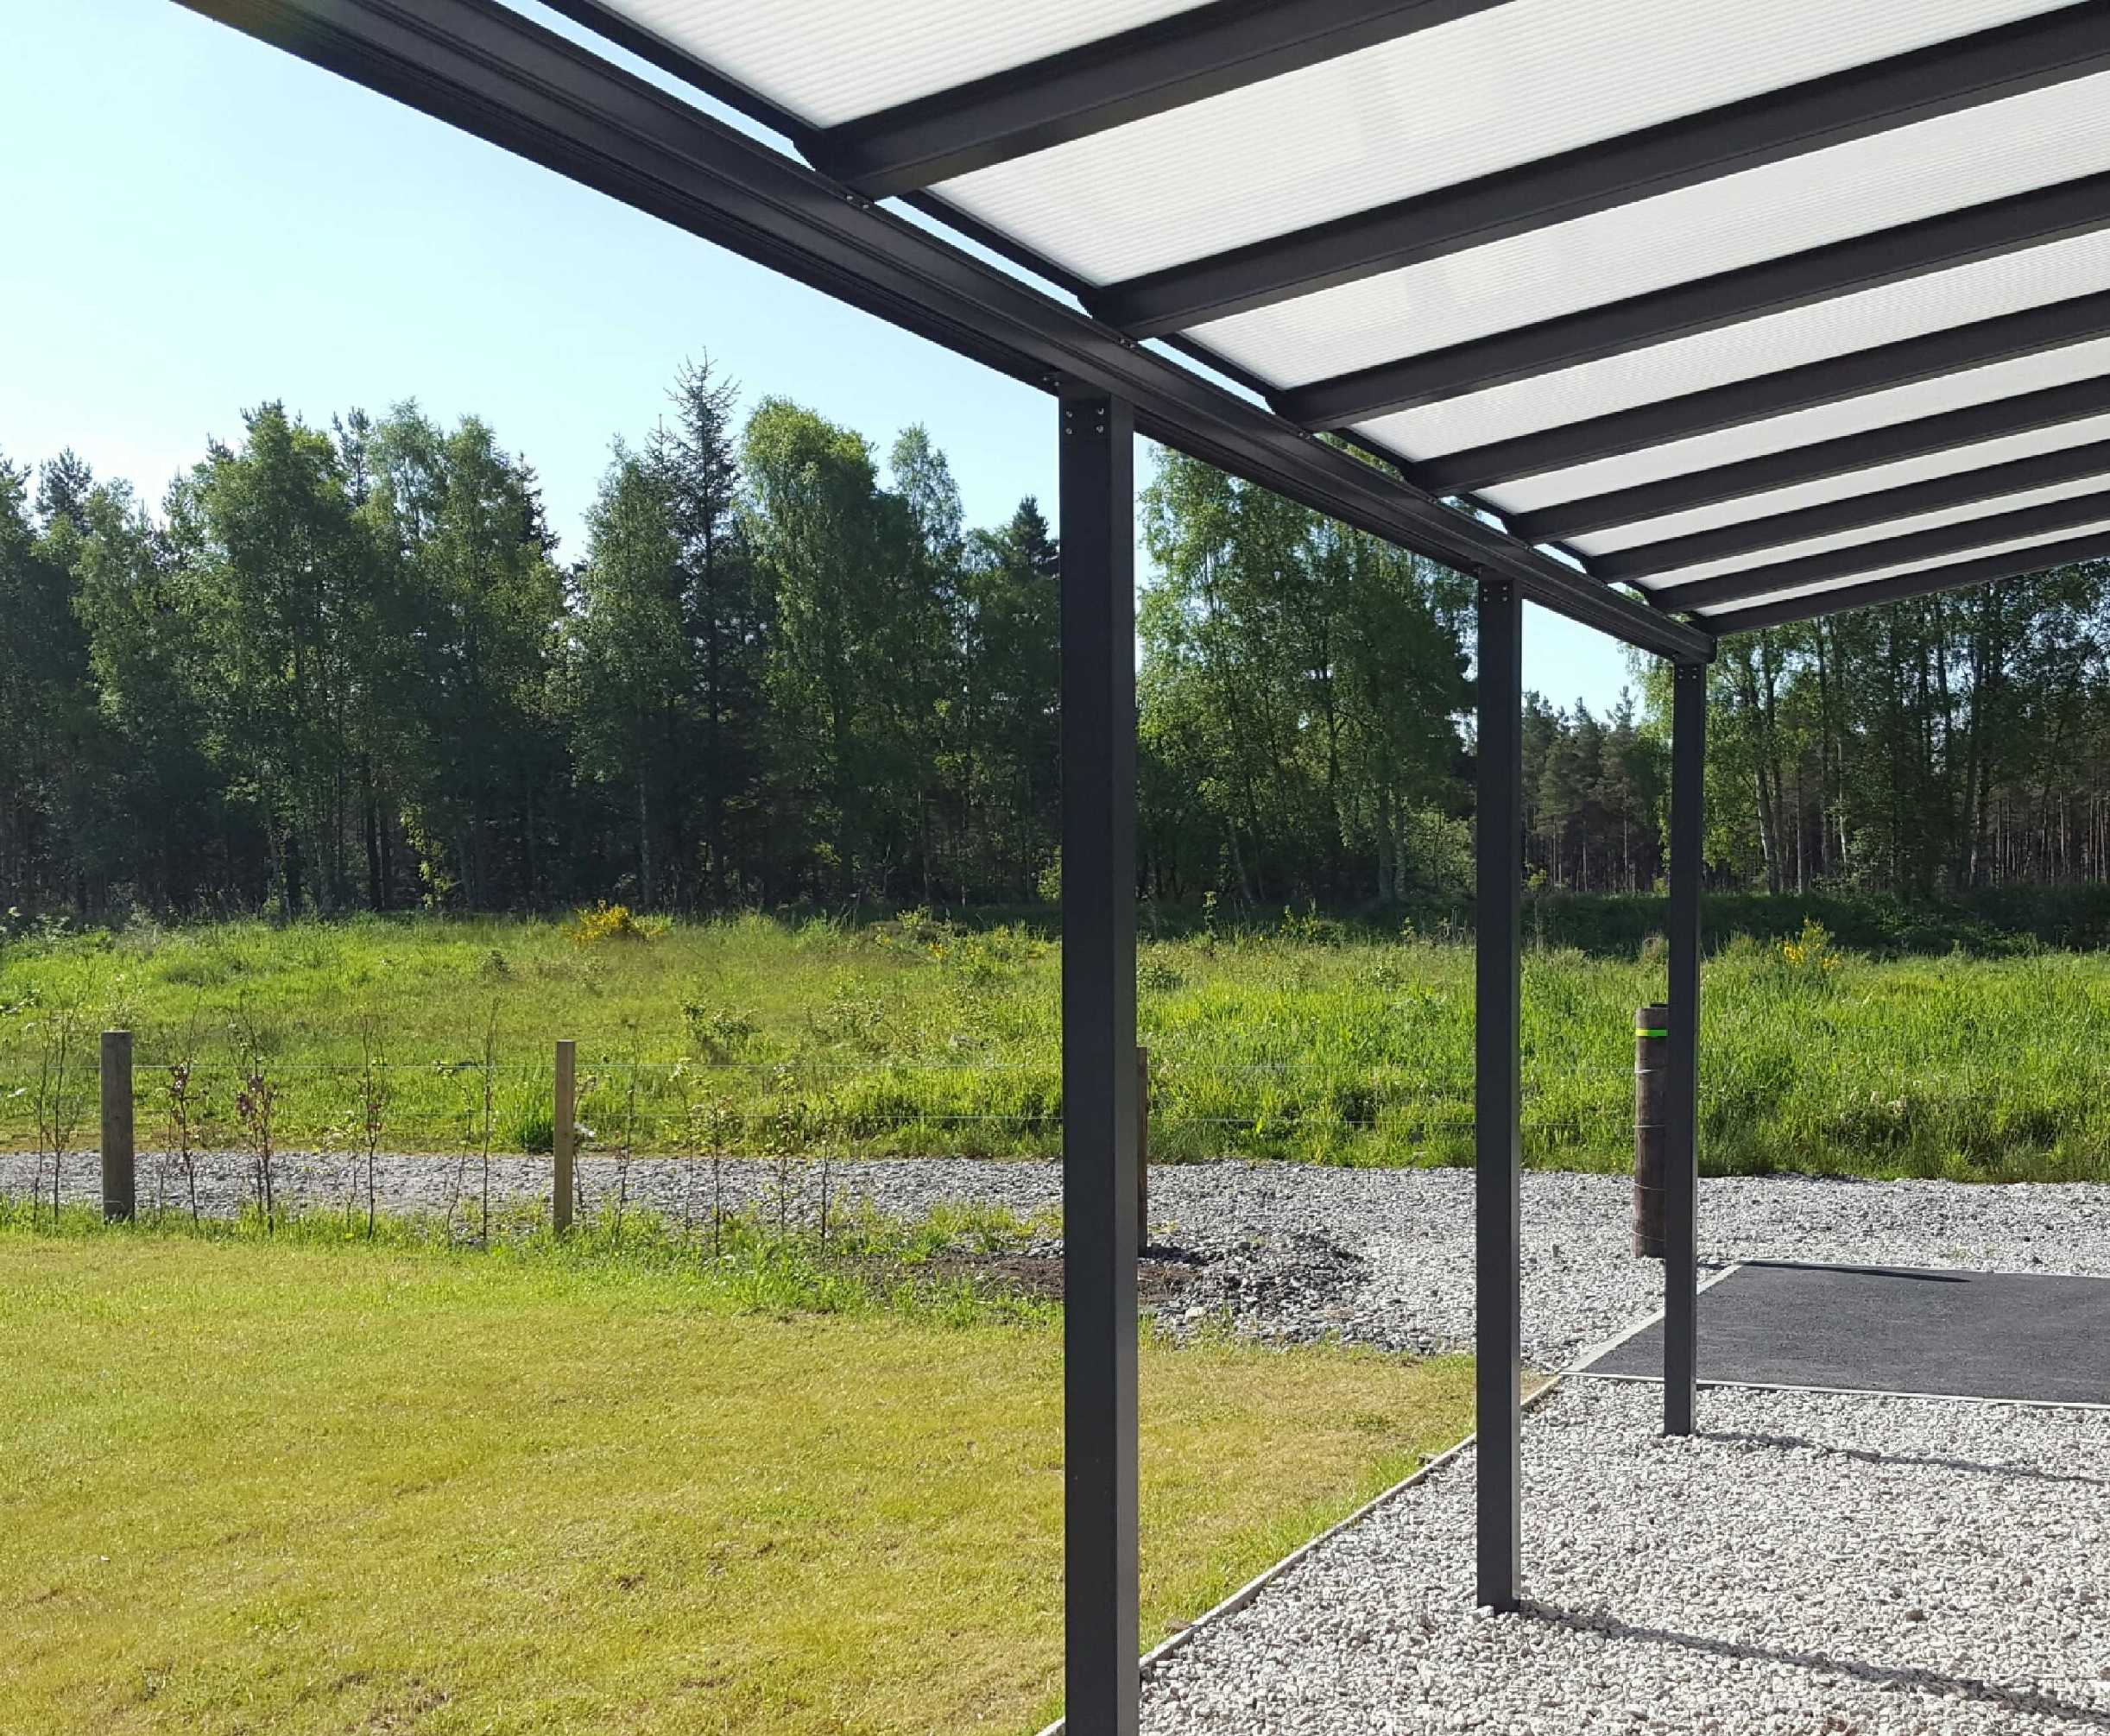 Omega Smart Lean-To Canopy, Anthracite Grey, 16mm Polycarbonate Glazing - 12.0m (W) x 4.0m (P), (5) Supporting Posts